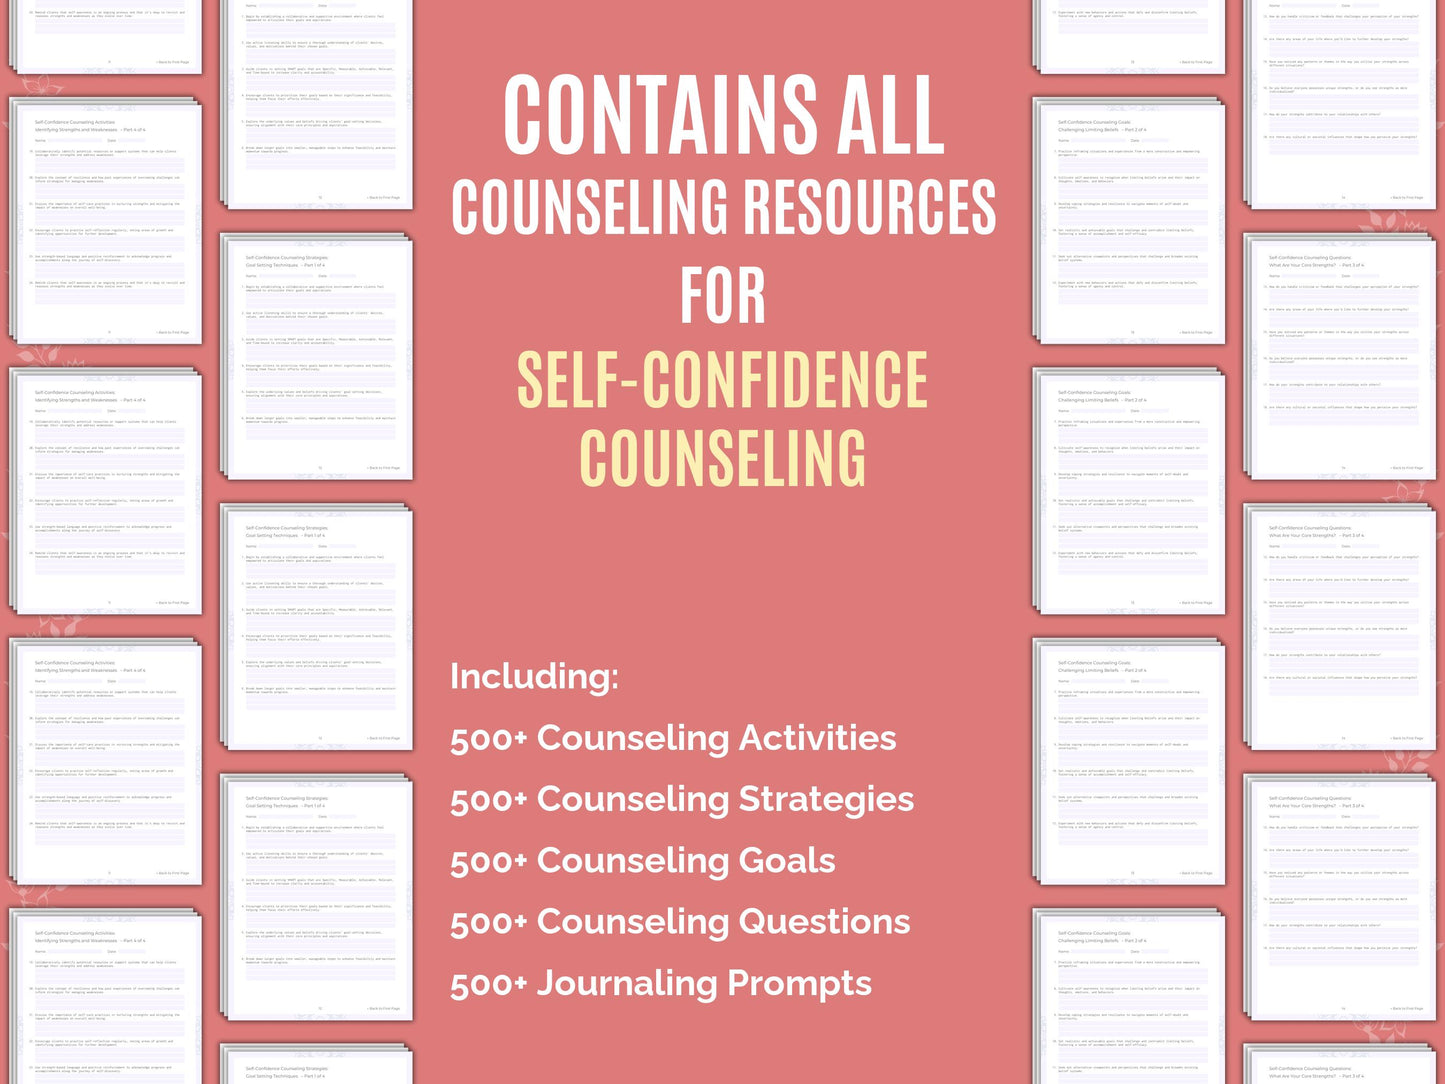 Counseling, Template, Self-Confidence Idea, Self-Confidence Tool, Workbook, Therapy, Resource, Mental Health, Content, Self-Confidence, Therapist, Counselor, Worksheet